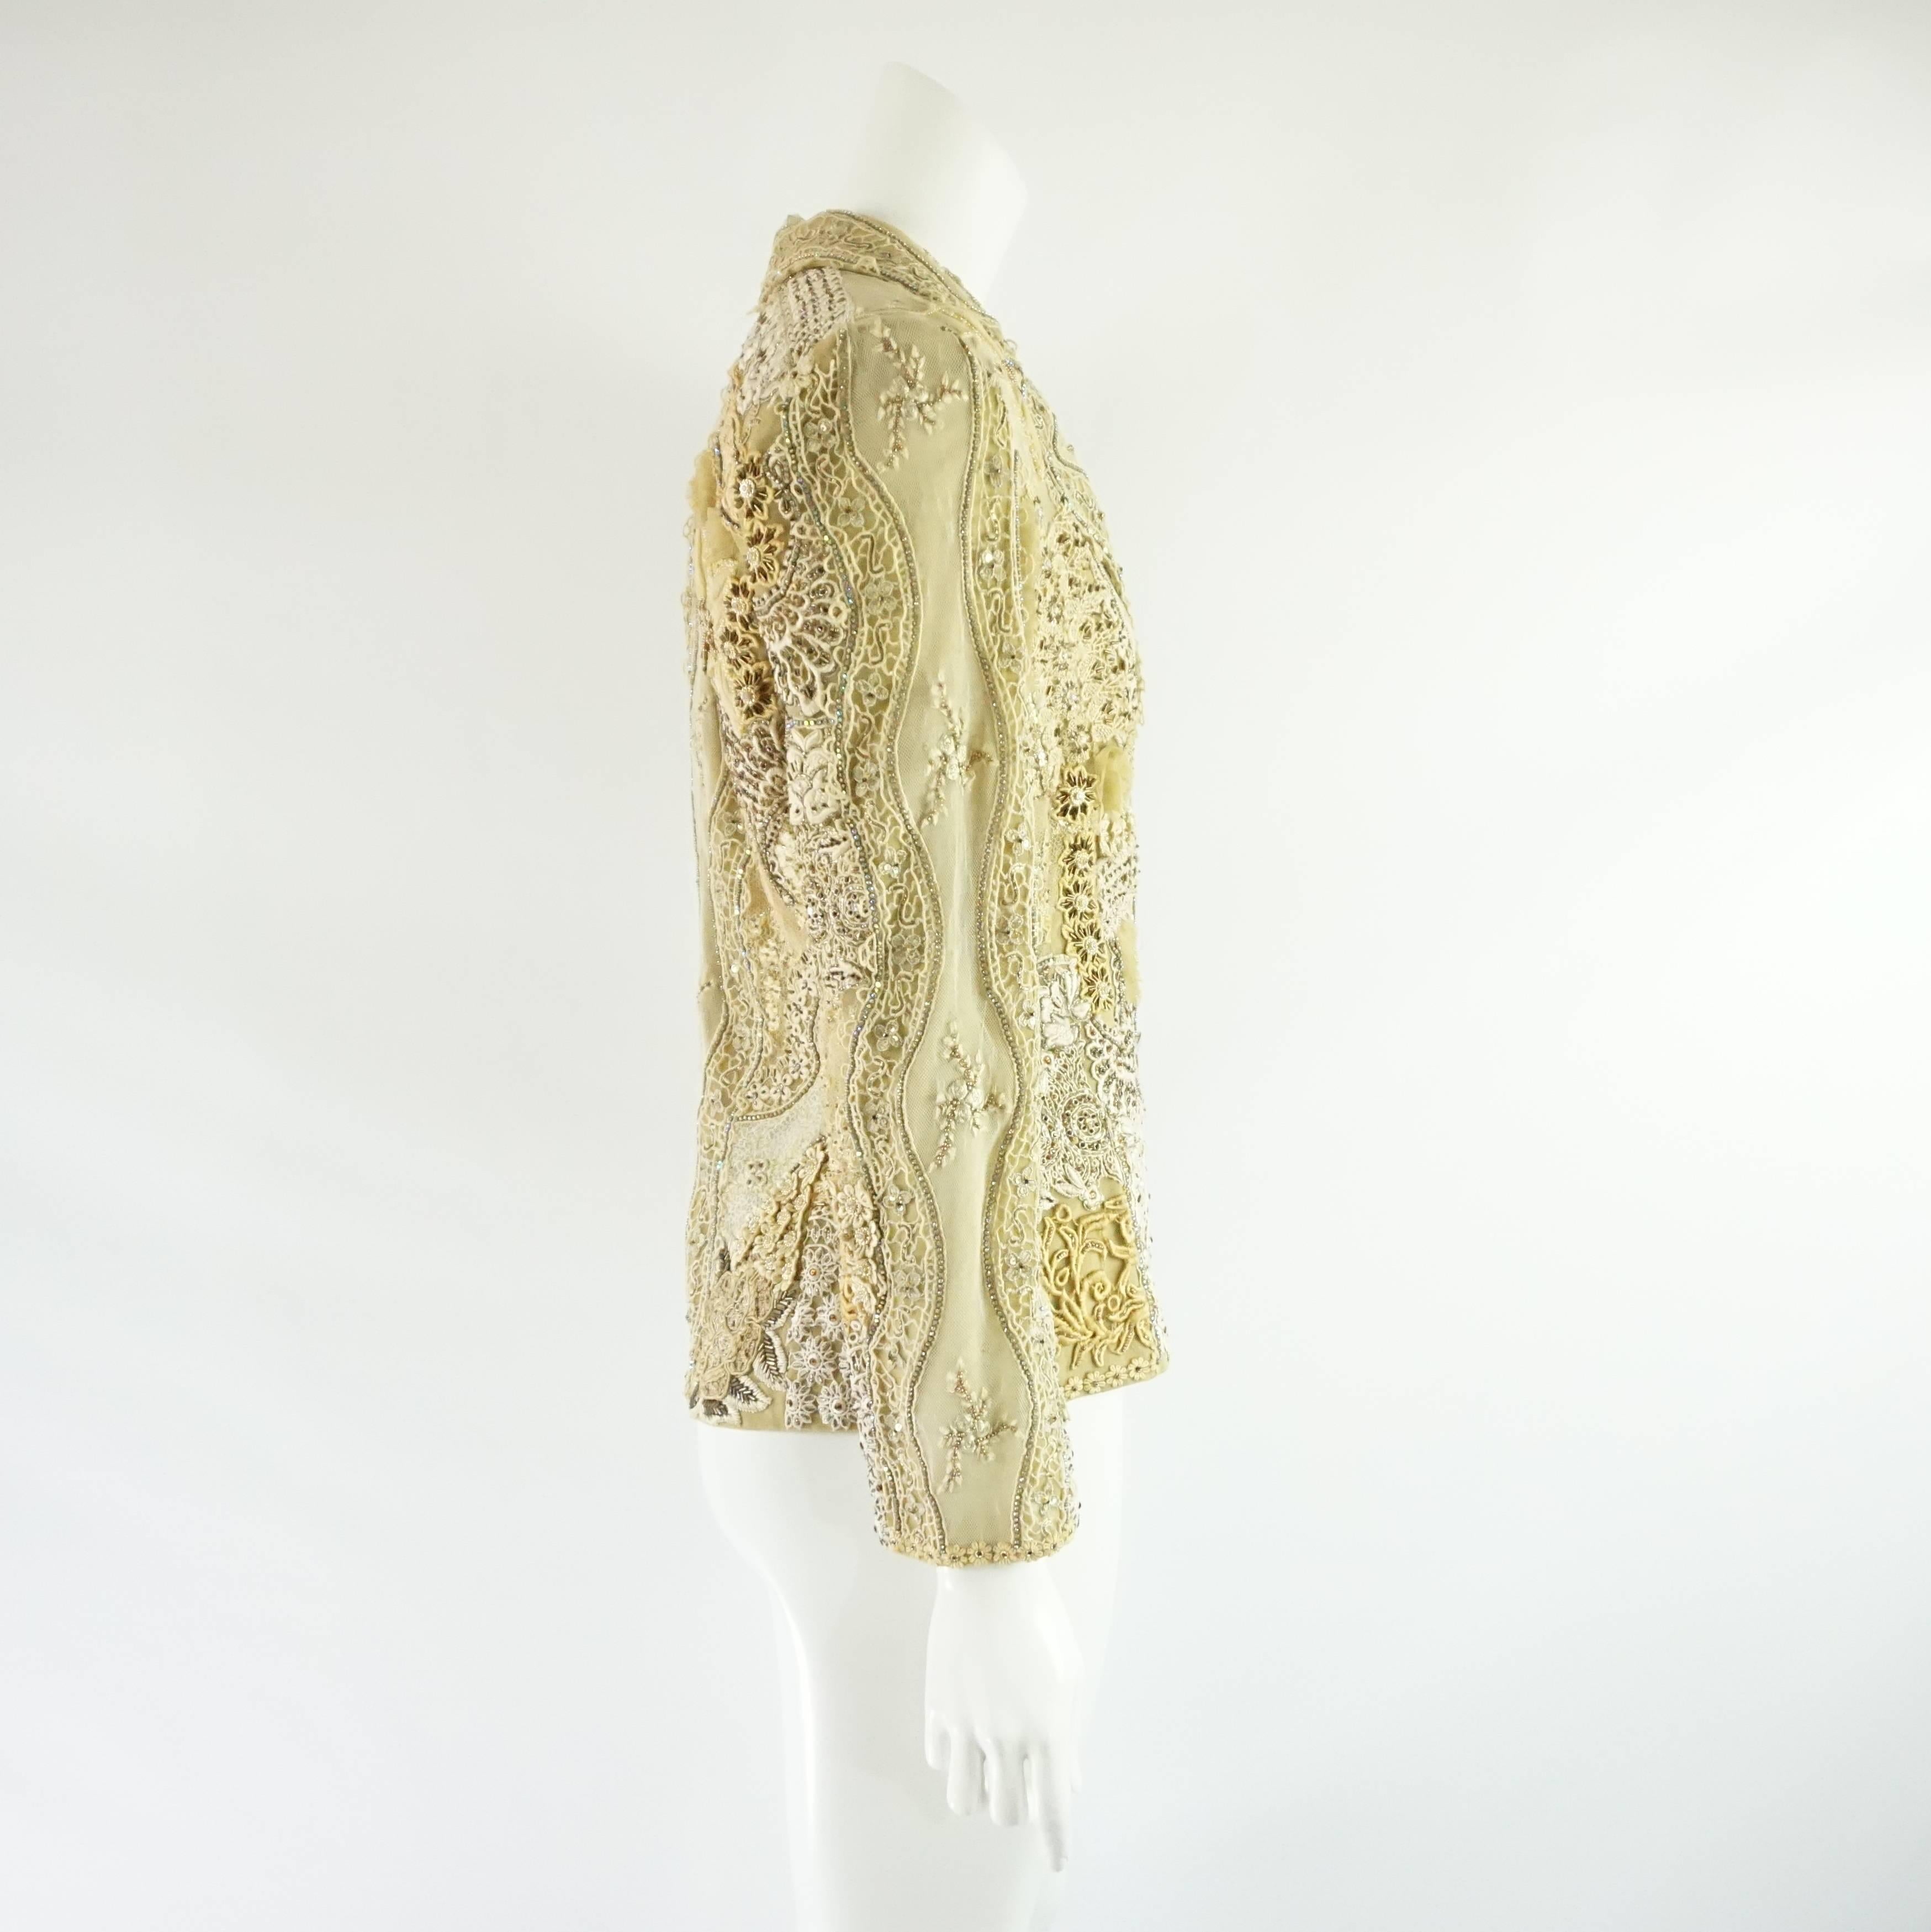 This stunning Ella Singh jacket is covered with different types of lace and embroidery with rhinestone strips and detailing. The jacket has a collar, shoulder pads, and iridescent buttons. The piece is in good vintage condition with some snags and